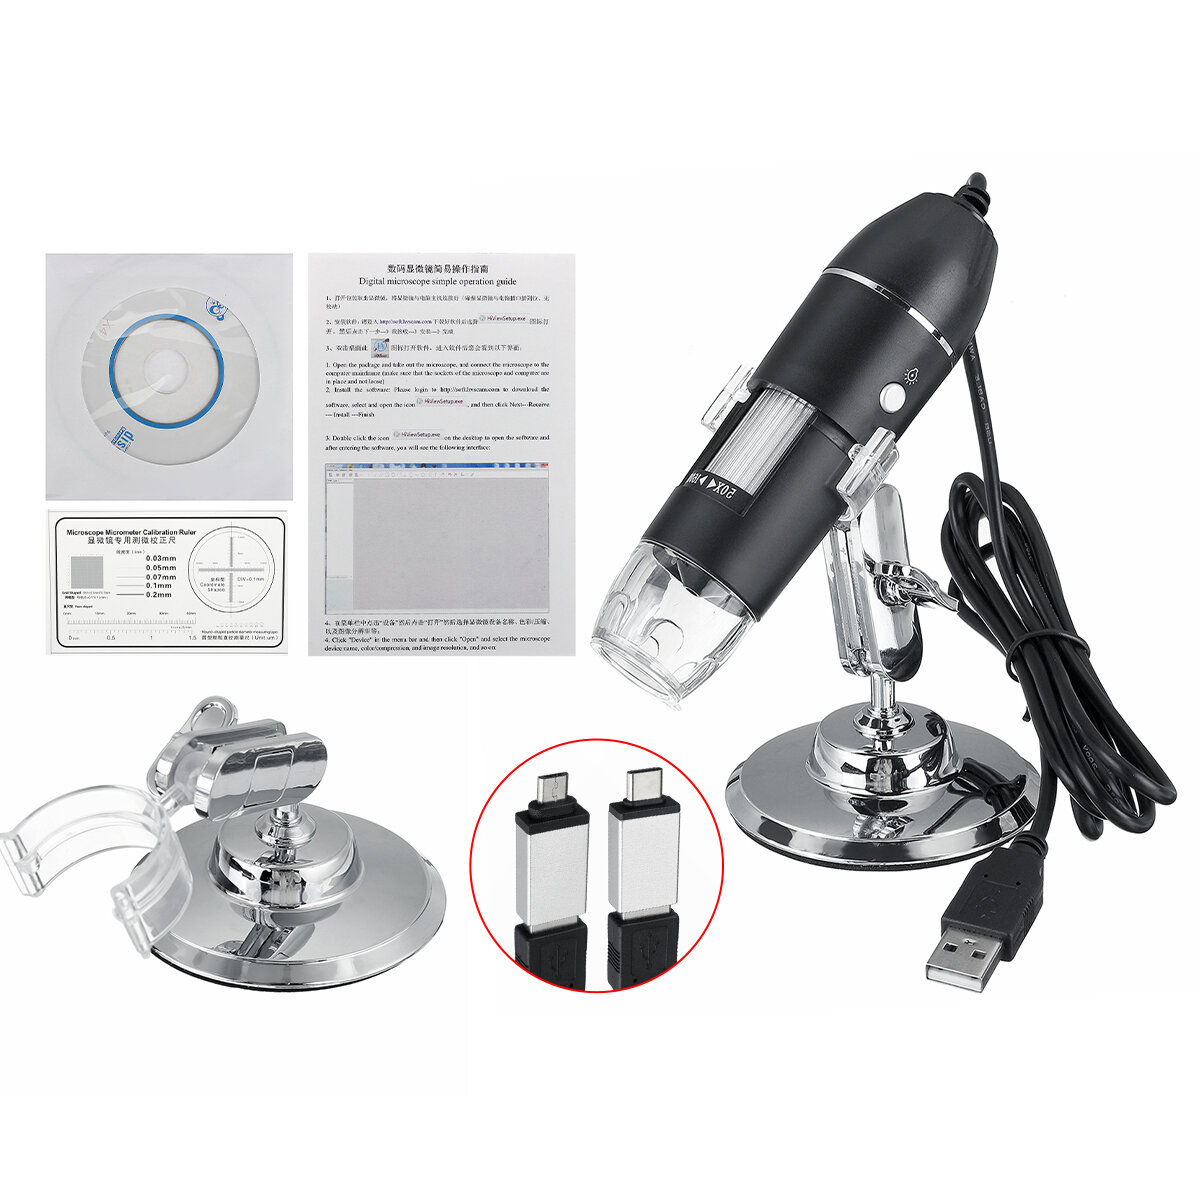 

8 LED Light Adjustable Dimmer Microscope Computers Real-Time Video Inspection Digital Microscope Micro USB+Type-C USB Ha